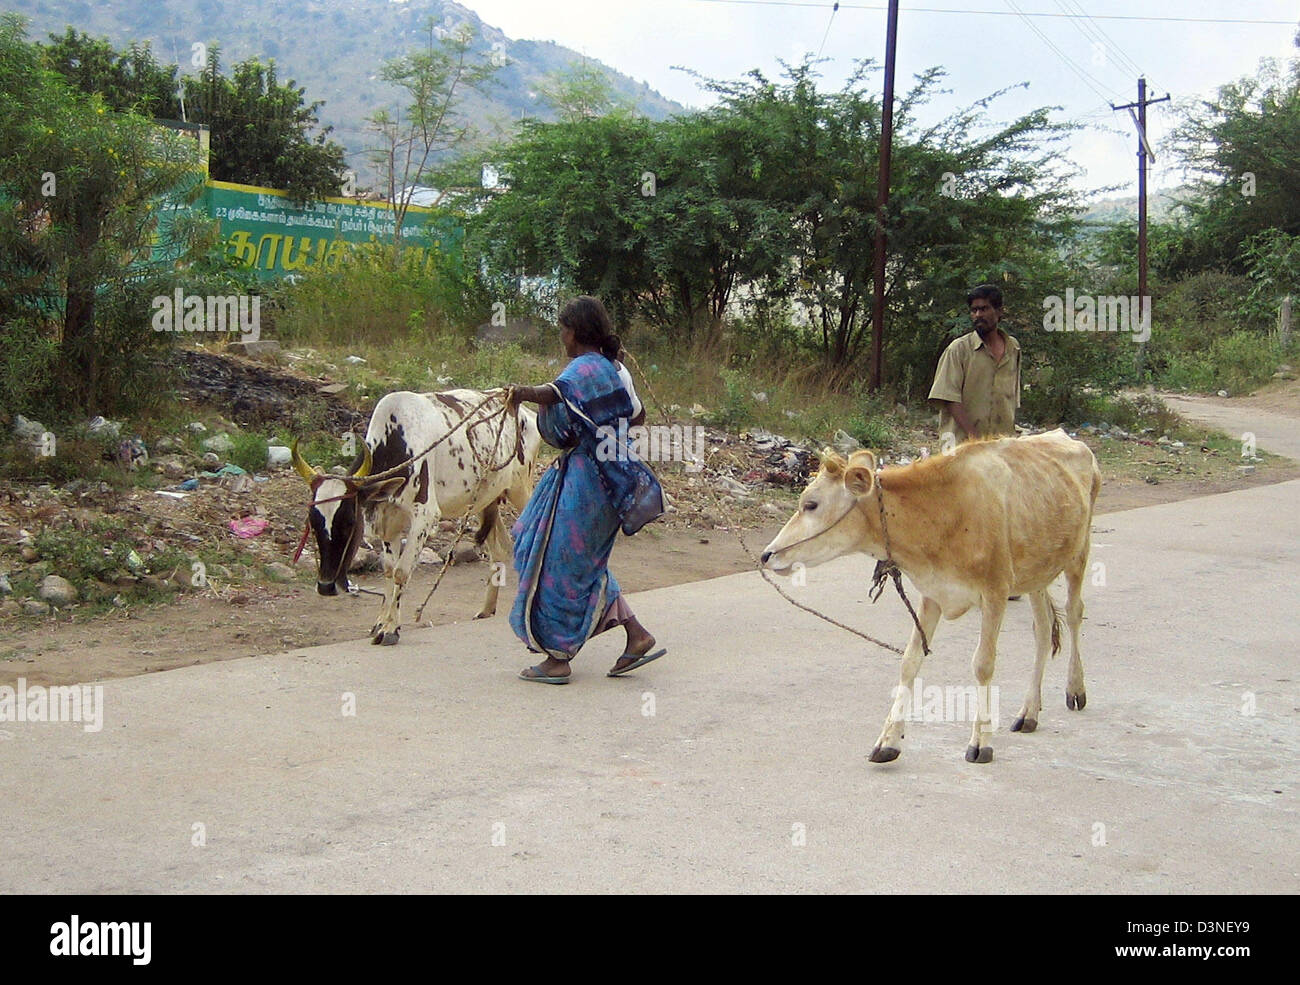 Woman guids cows across the pilgrimage road at the holy mountain Arunachala near Tiruvannamalai, located in the federal state of Tamil Nadu, India, 03 March 2006. With its 980 meters hight Arunachala mountain is India's holiest Hindu mountain and the former domicile of Sri Ramana Maharshi, one of India's wise men. Photo: Beate Schleep Stock Photo